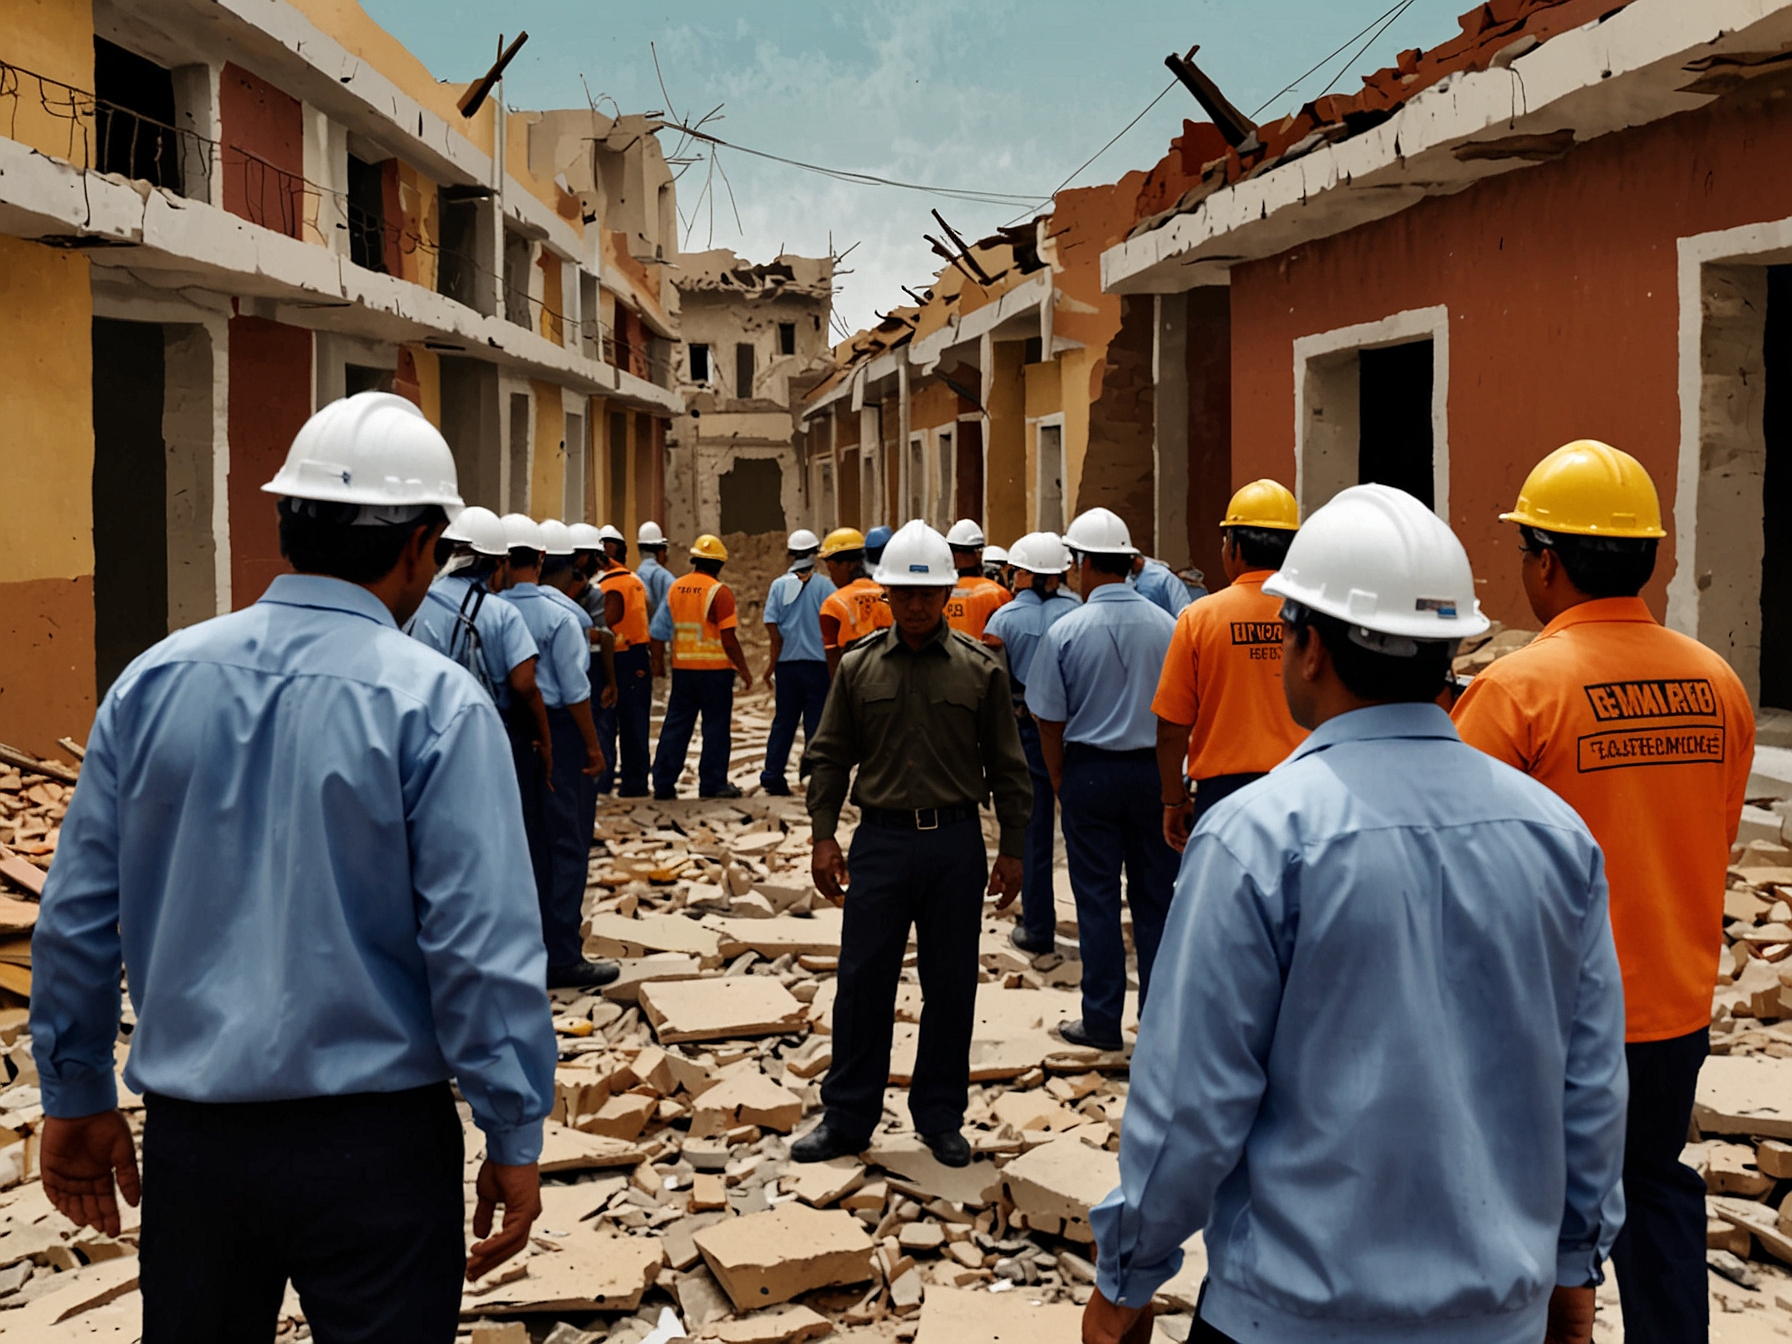 Emergency response teams in southern Peru evaluate the structural damage caused by the earthquake. The image captures officials and citizens inspecting buildings and providing assistance to affected areas.